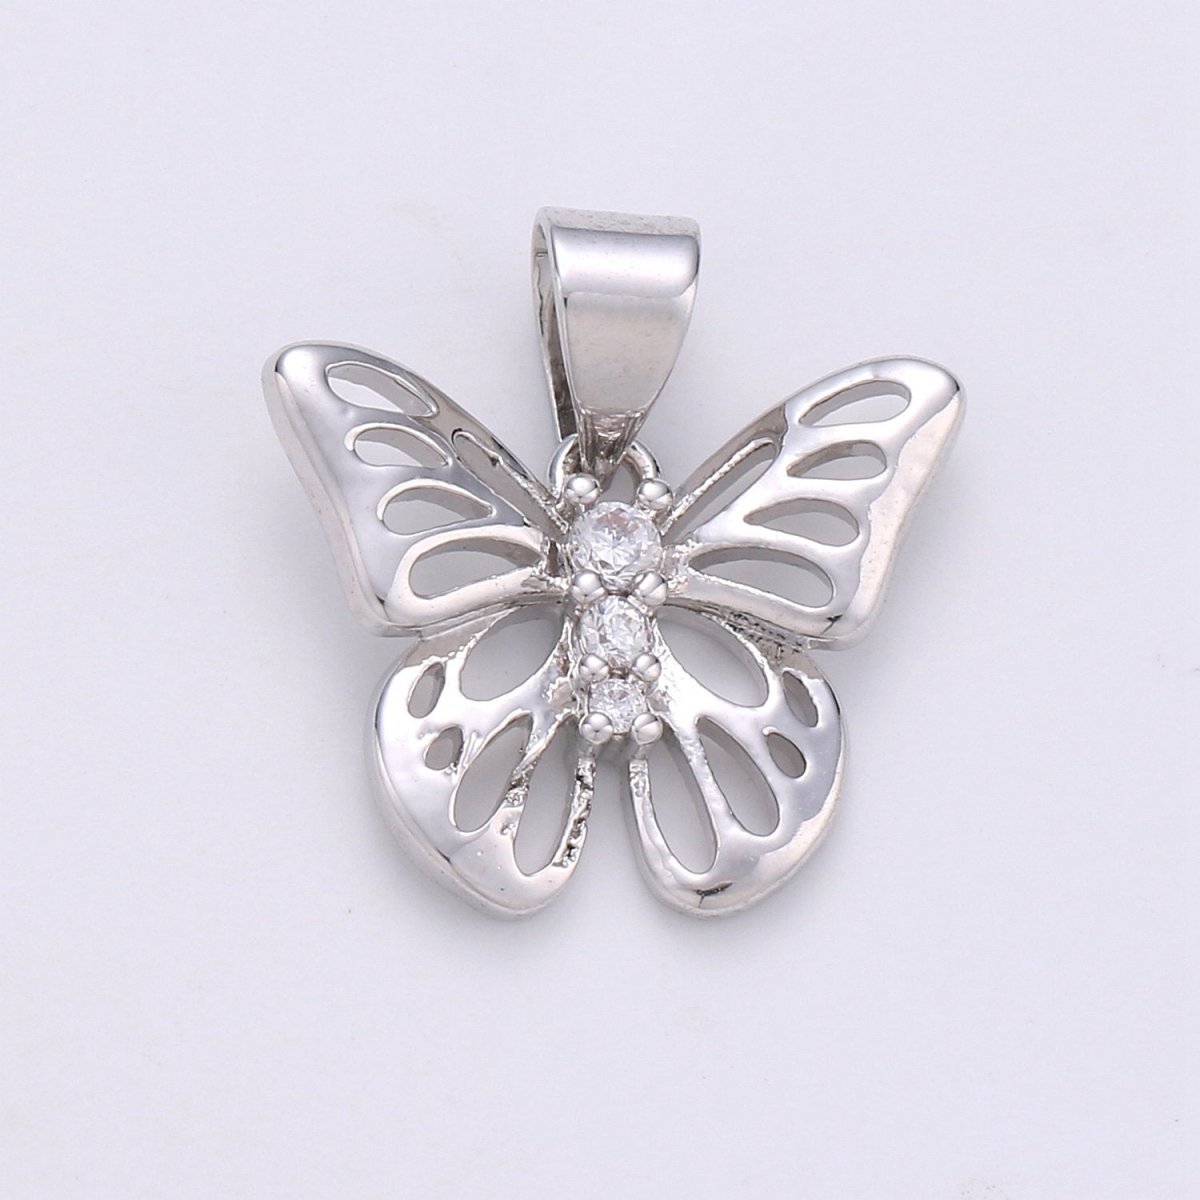 11mm Butterfly Charm Micro Pave Butterfly Charm, Past Present Future CZ in Butterfly Pendant, 14K Gold Filled Charm J-007 J-008 - DLUXCA